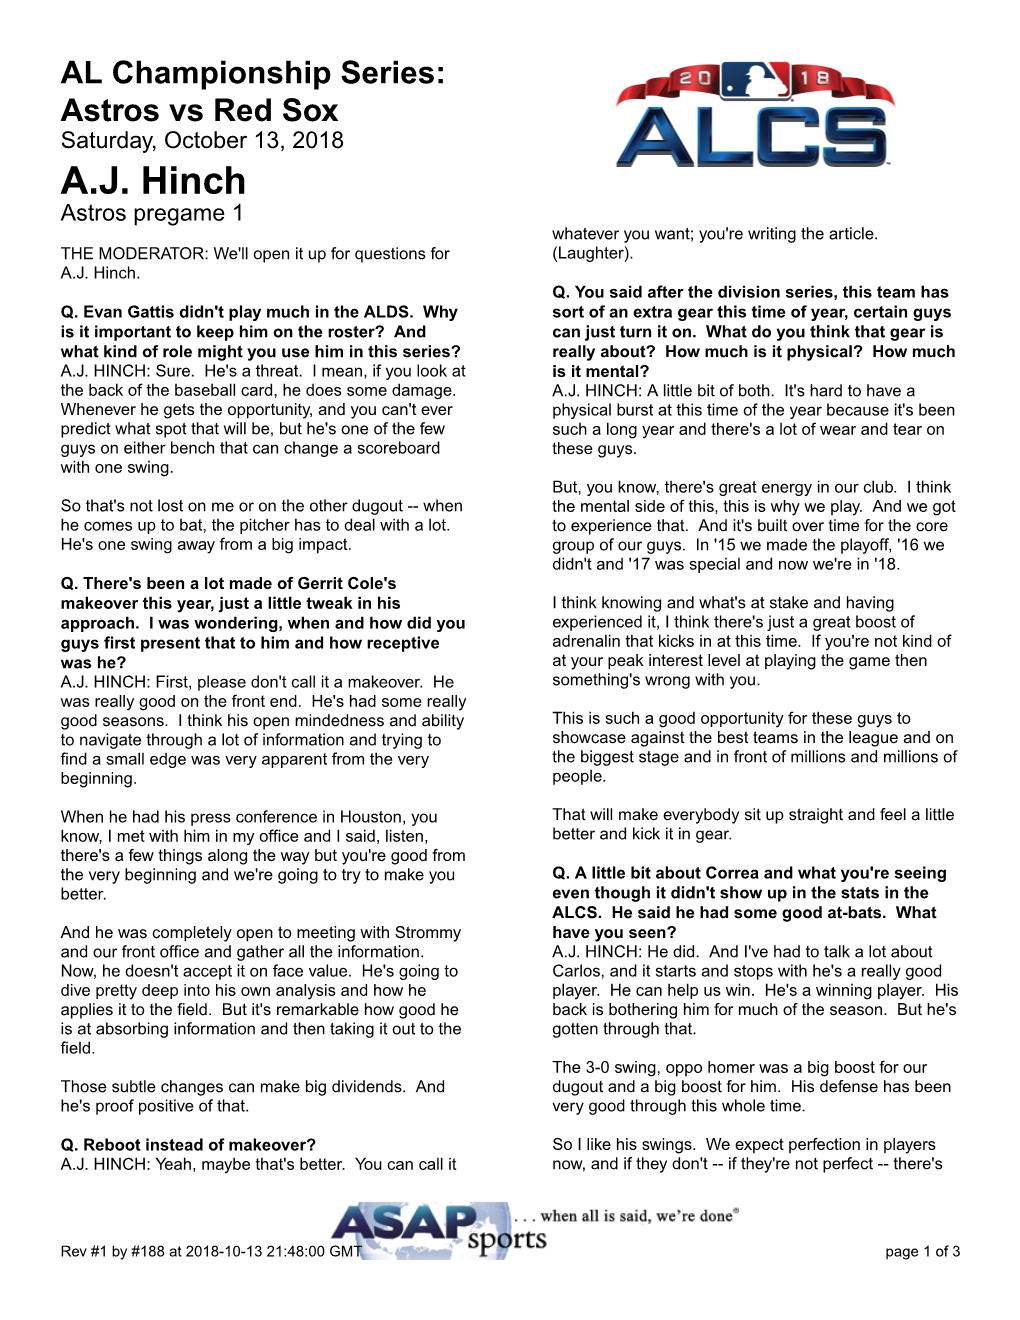 A.J. Hinch Astros Pregame 1 Whatever You Want; You're Writing the Article